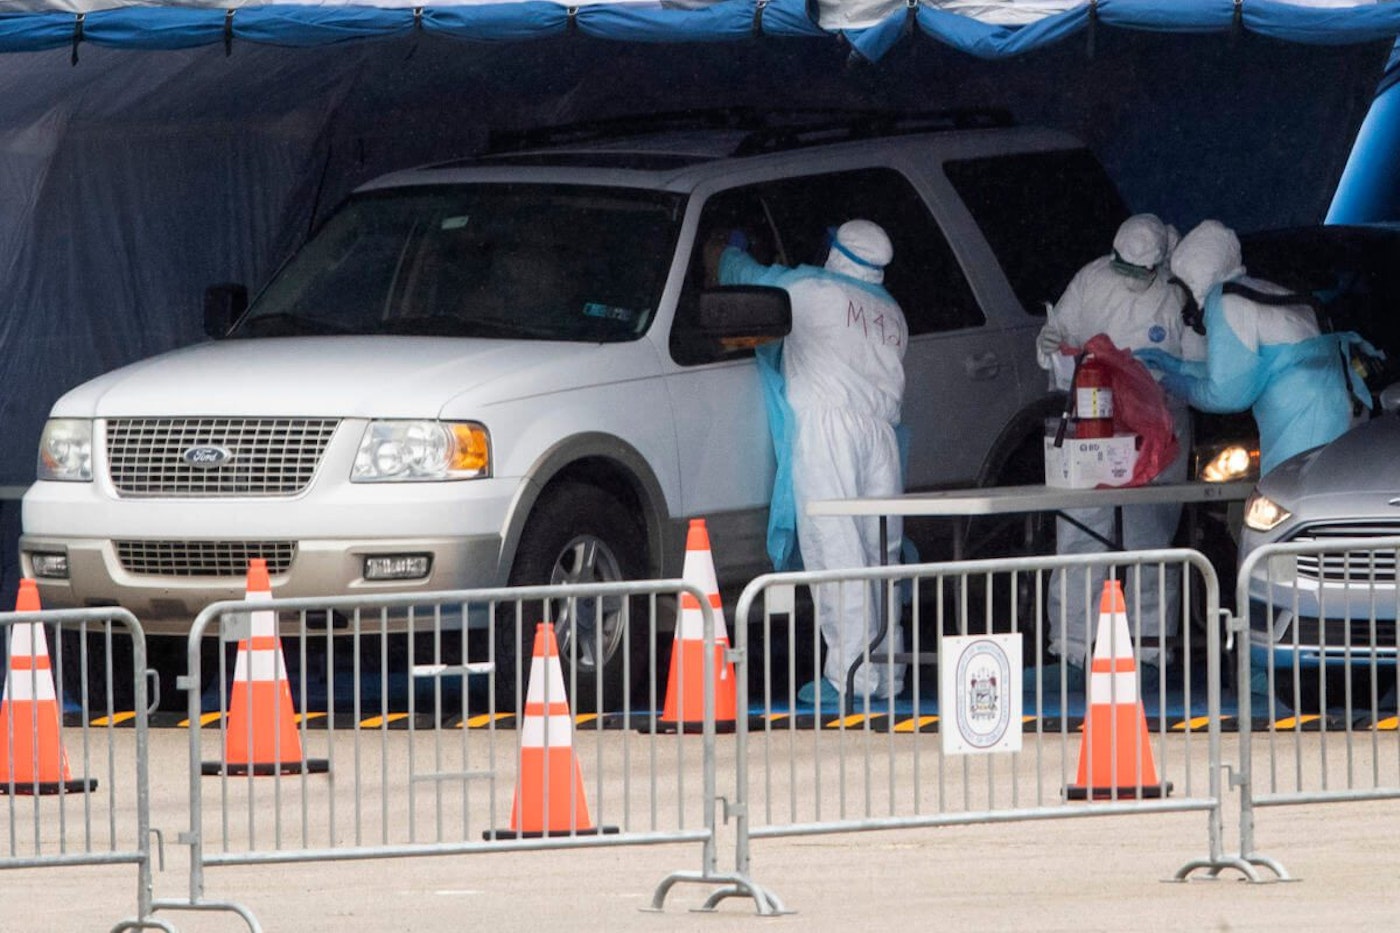 Medical workers perform a coronavirus test on driver at the Temple University Ambler campus in Ambler, Pa., Wednesday, March 25, 2020. (AP Photo/Matt Rourke)